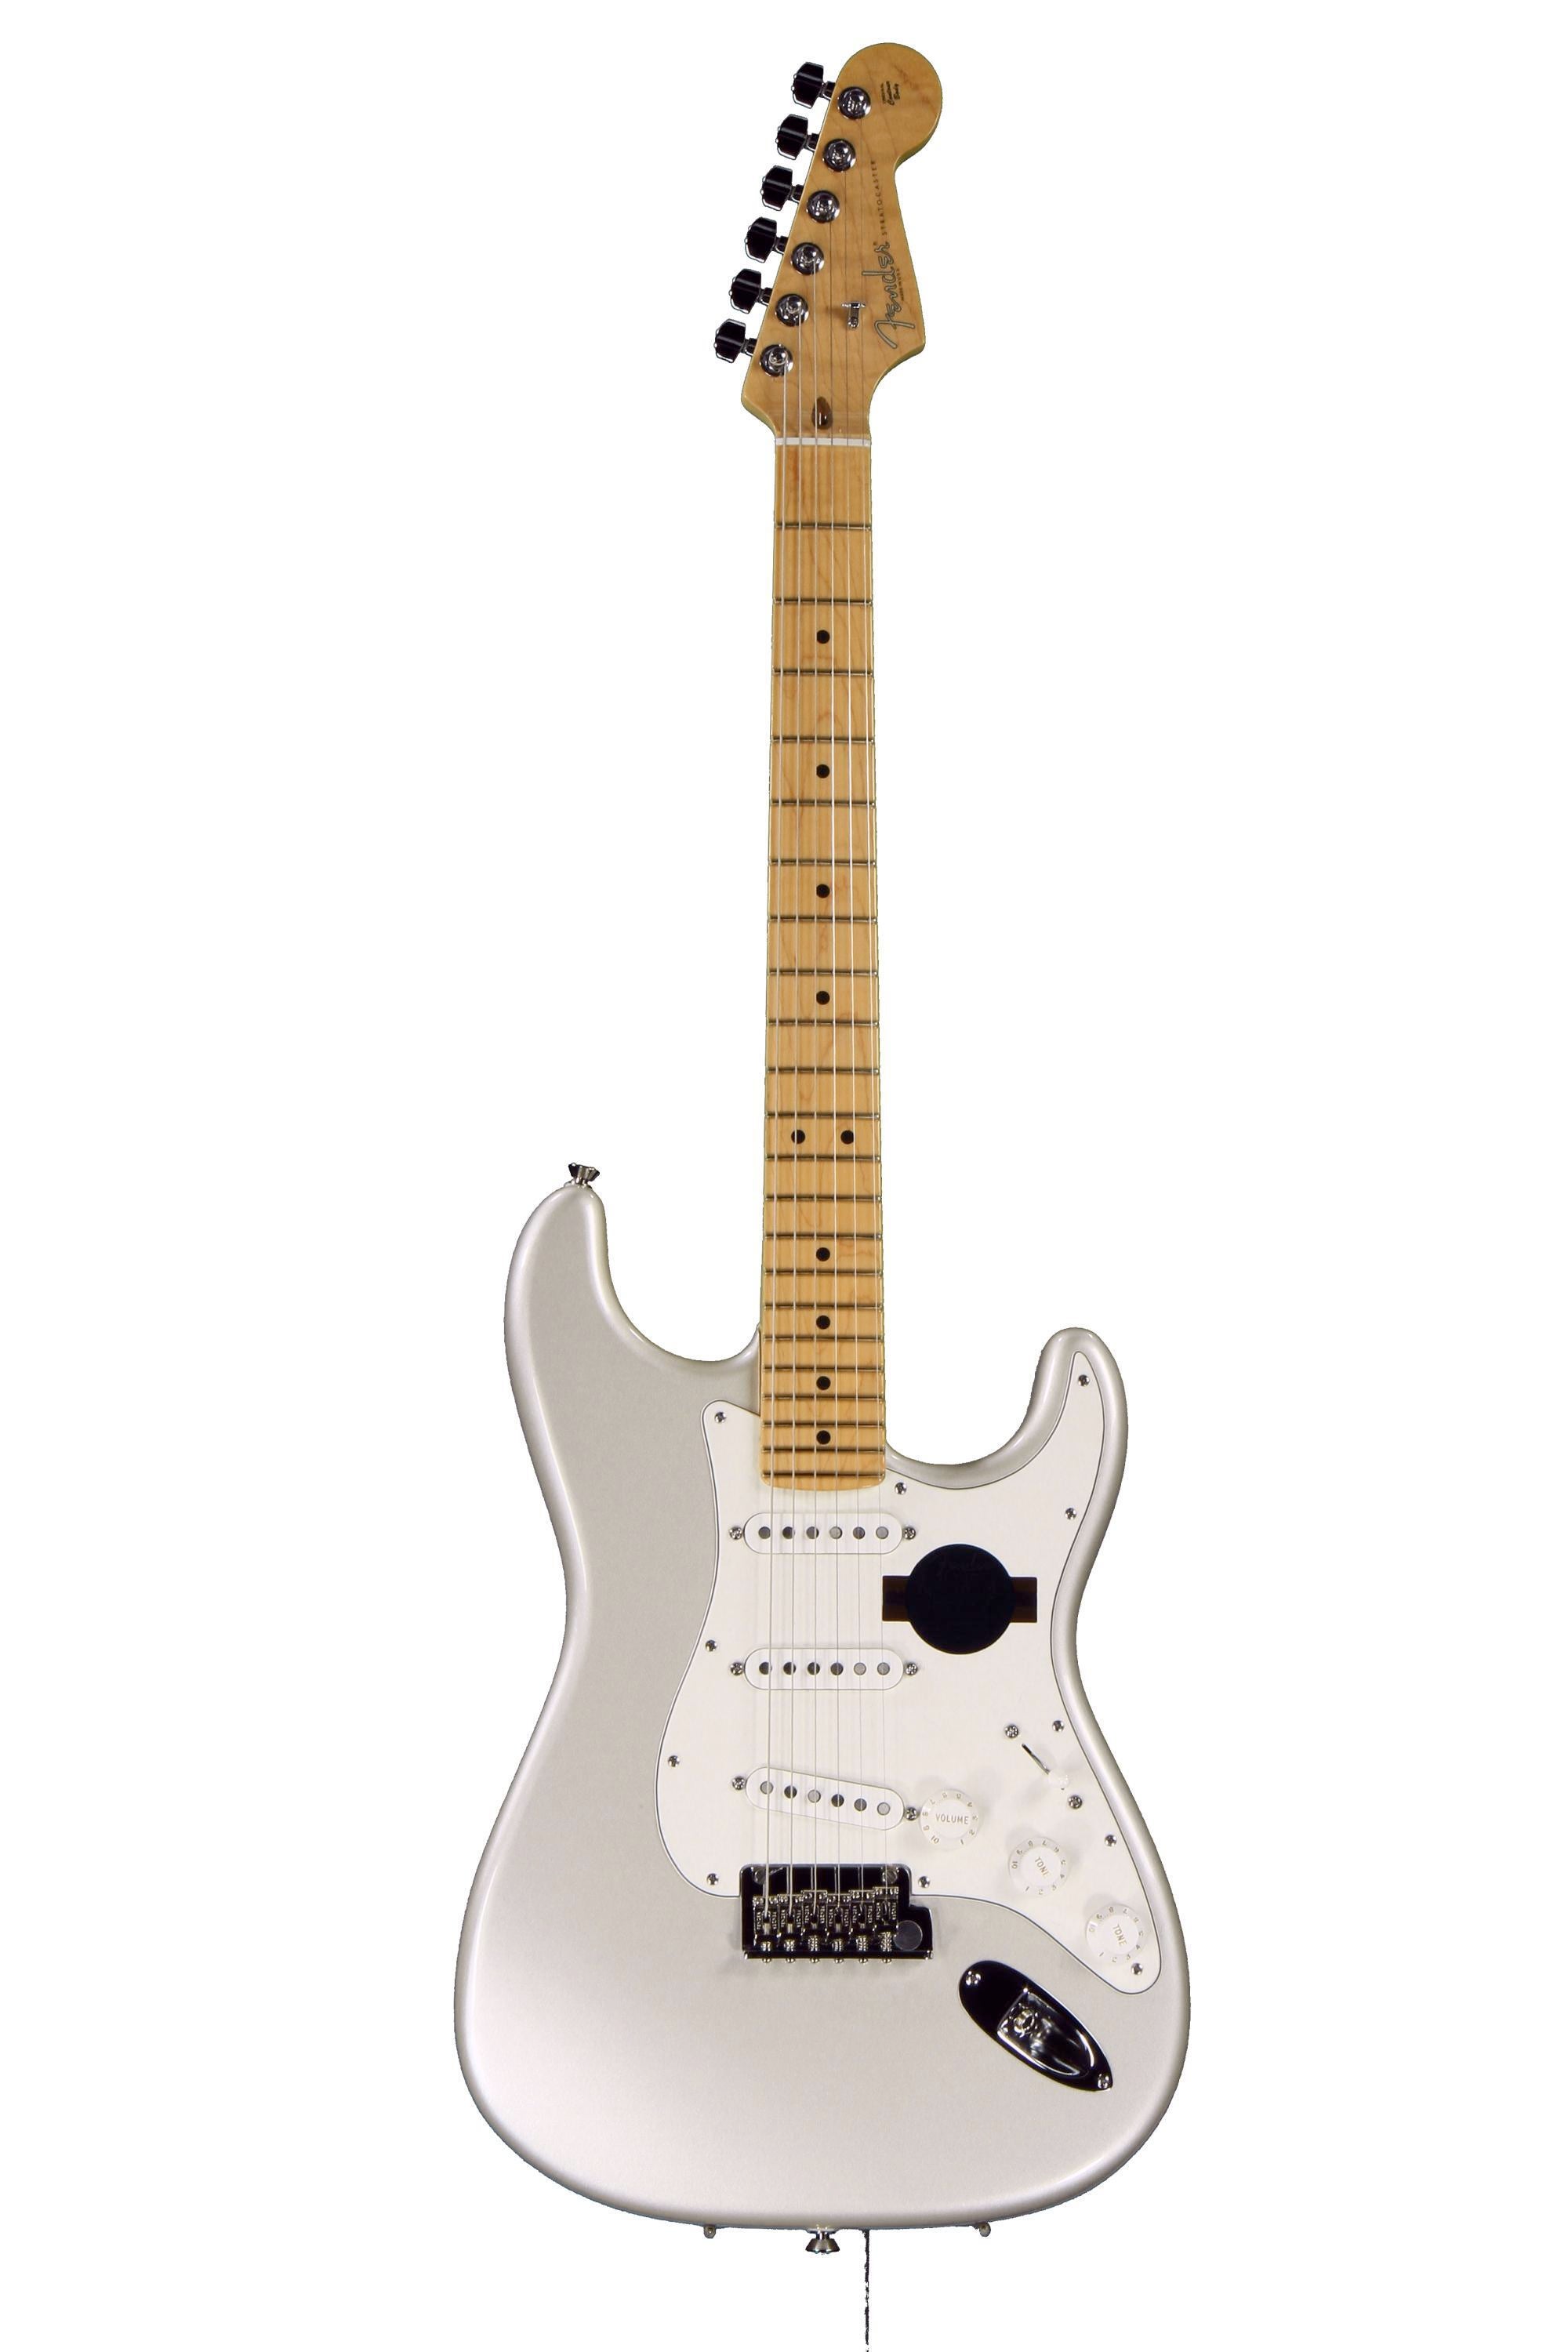 Fender American Standard Stratocaster - Blizzard Pearl | Sweetwater